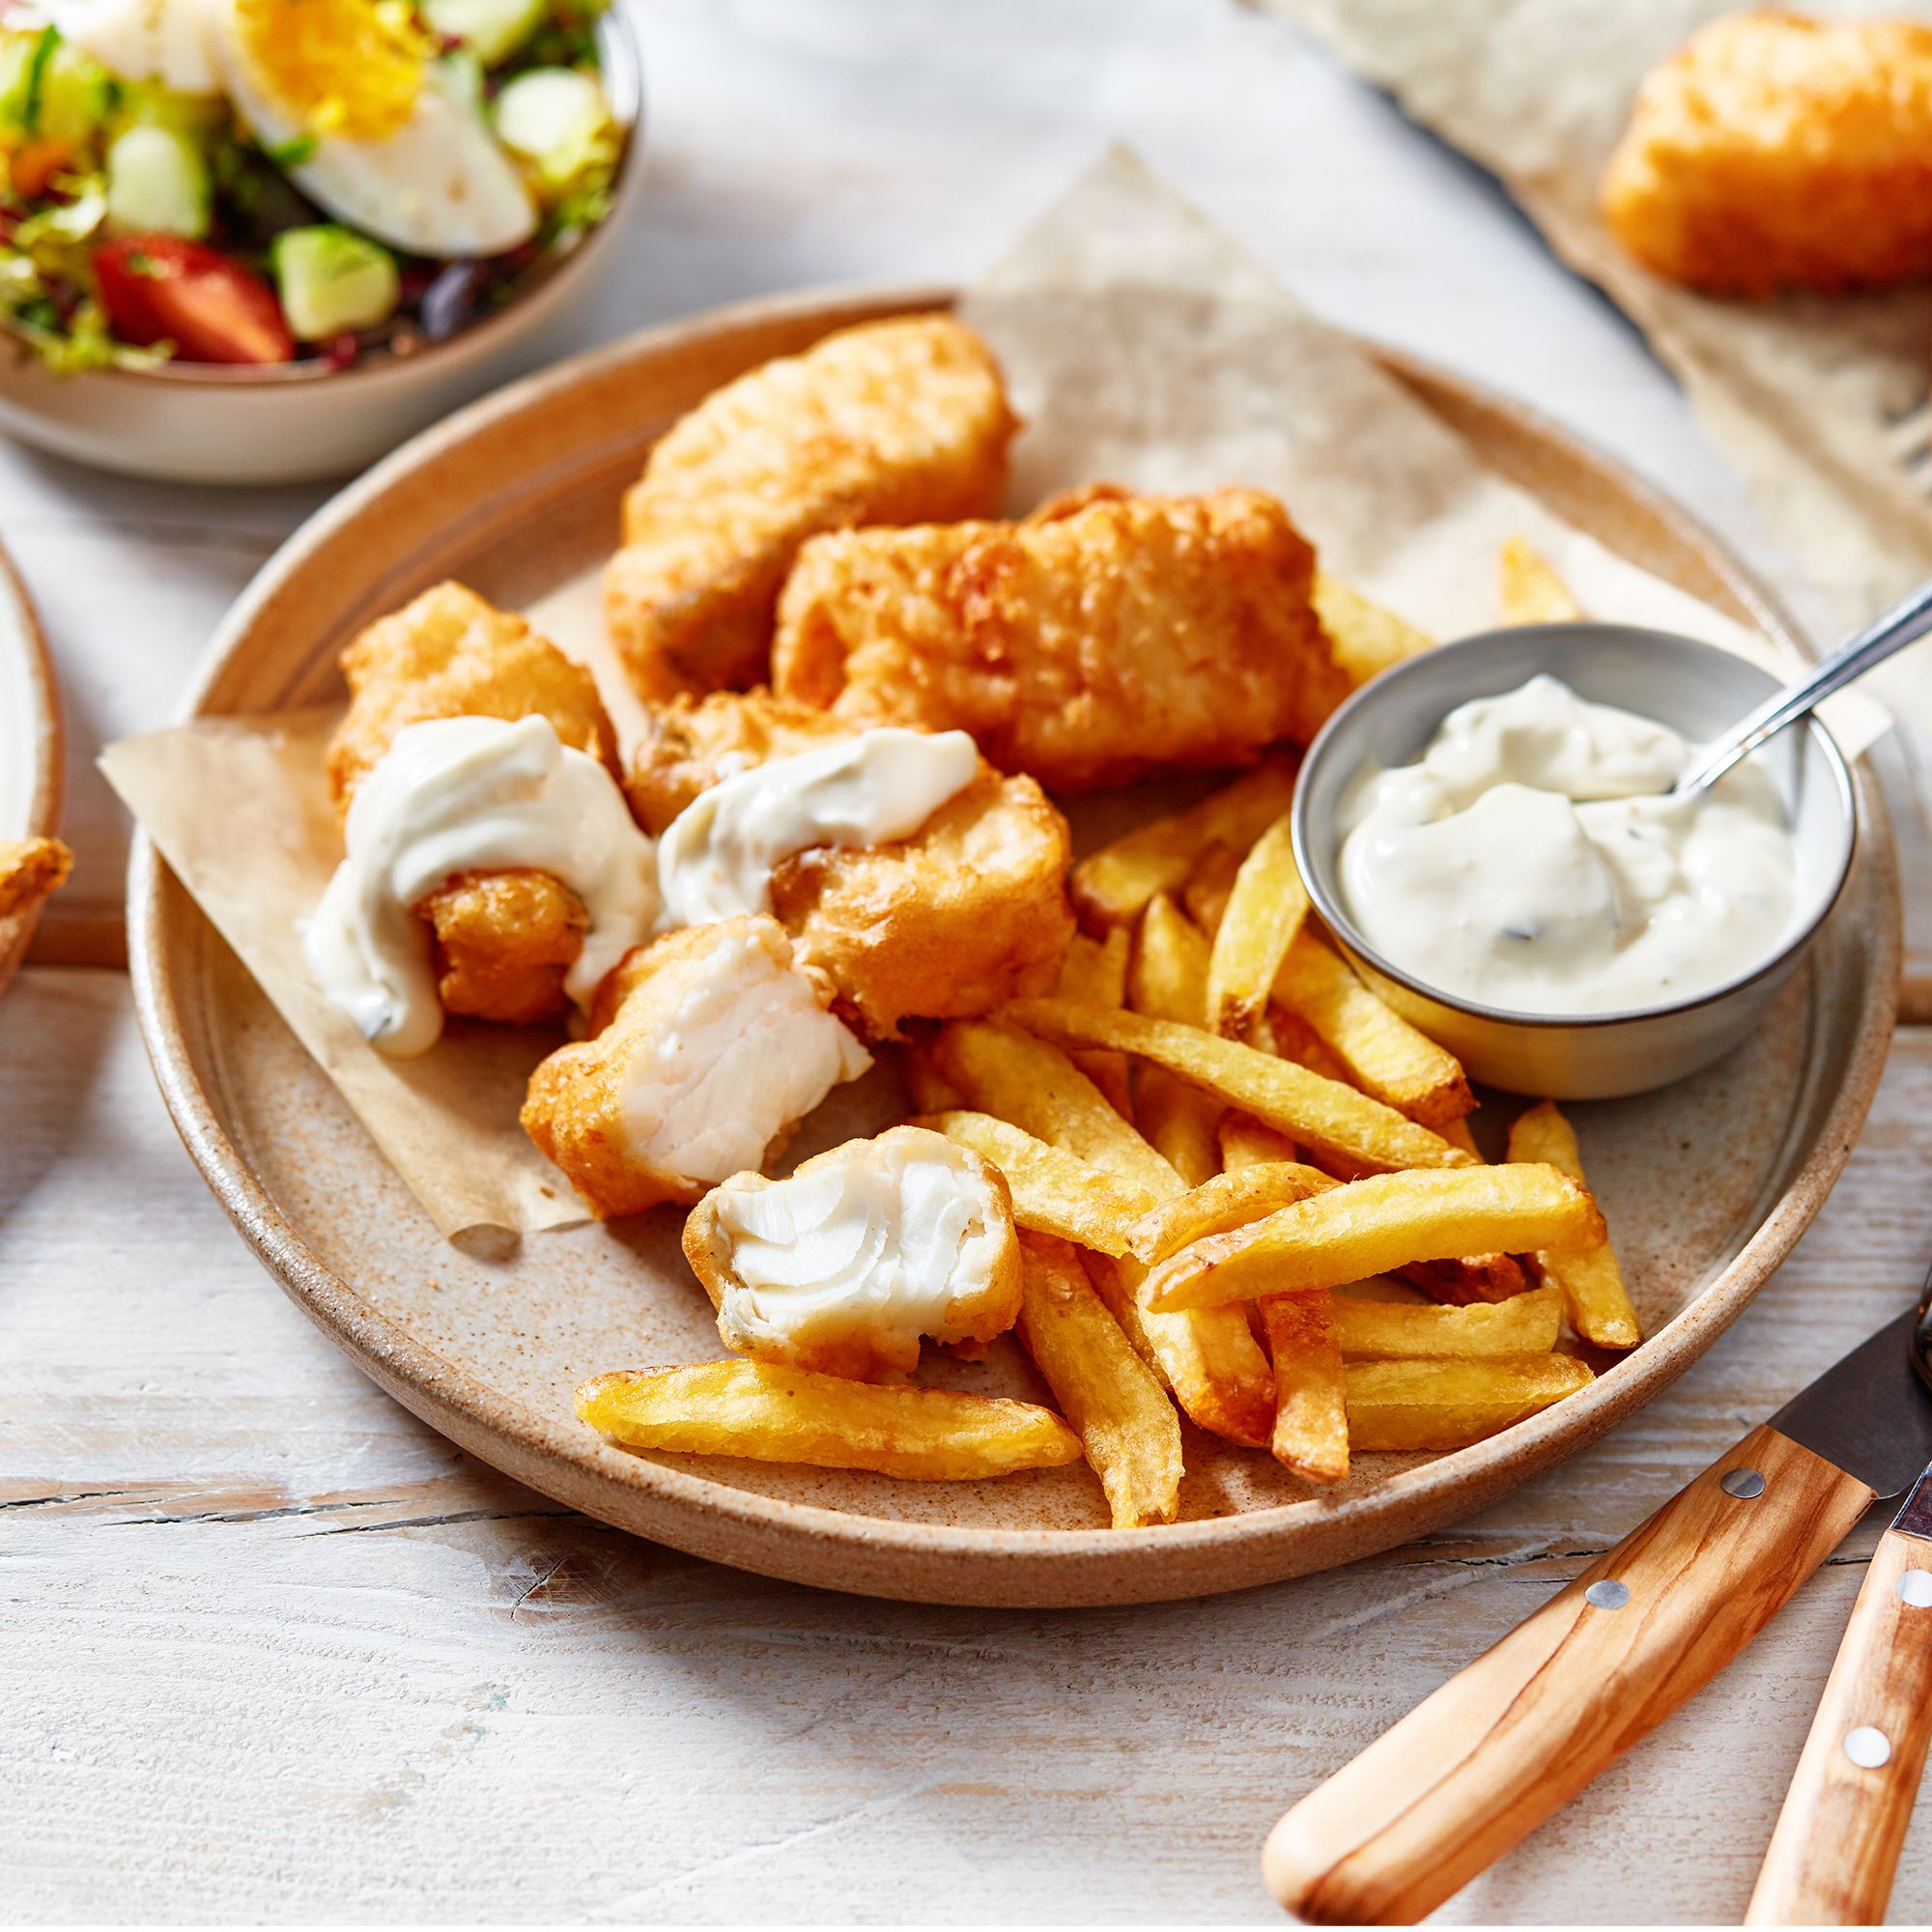 What To Do With Leftover Fish and Chips